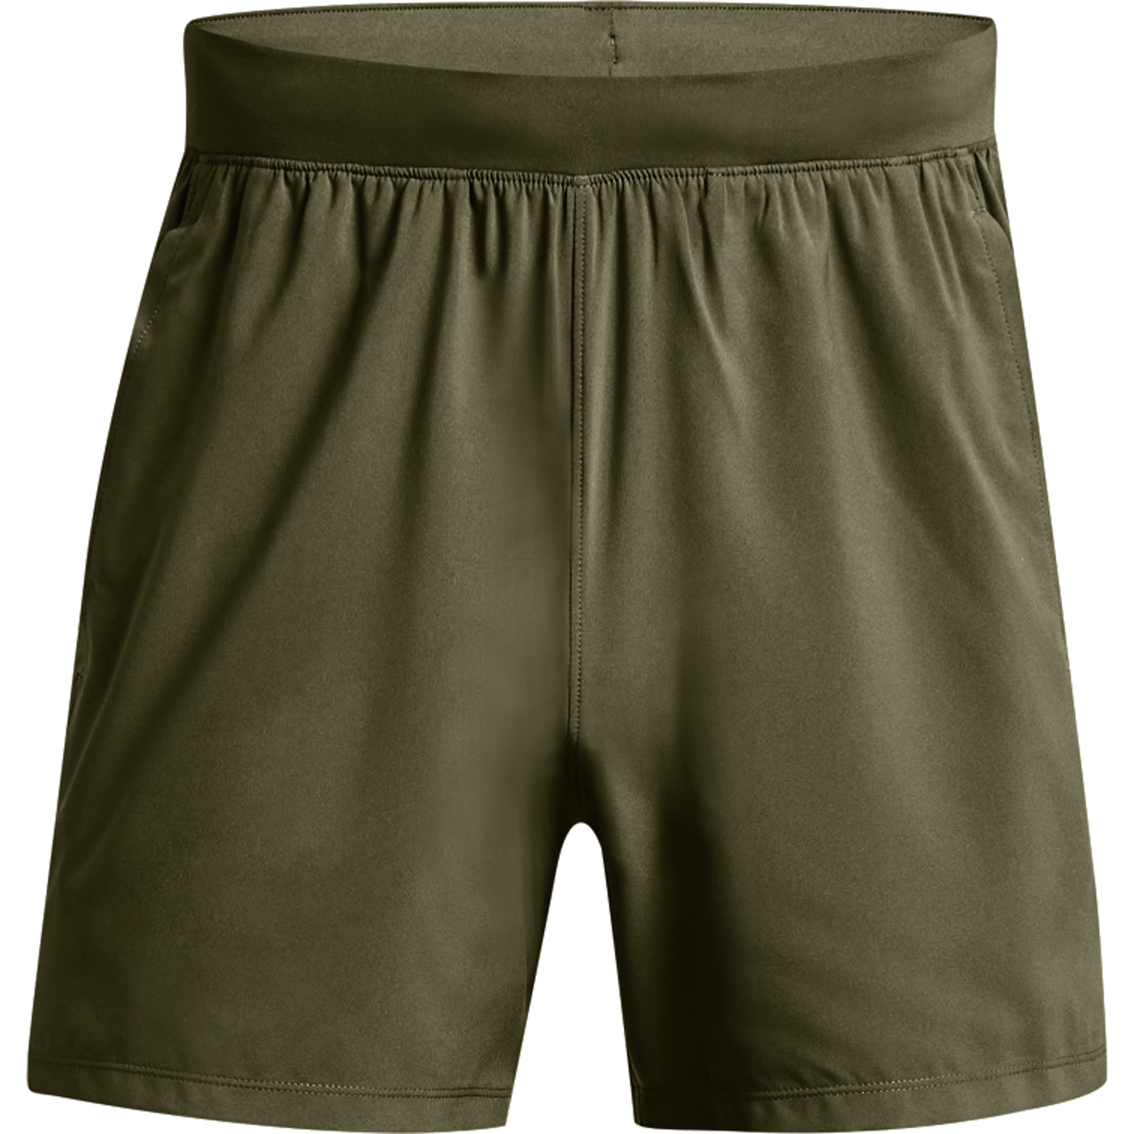 Under Armour Tac Academy 5 Shorts - Image 5 of 7